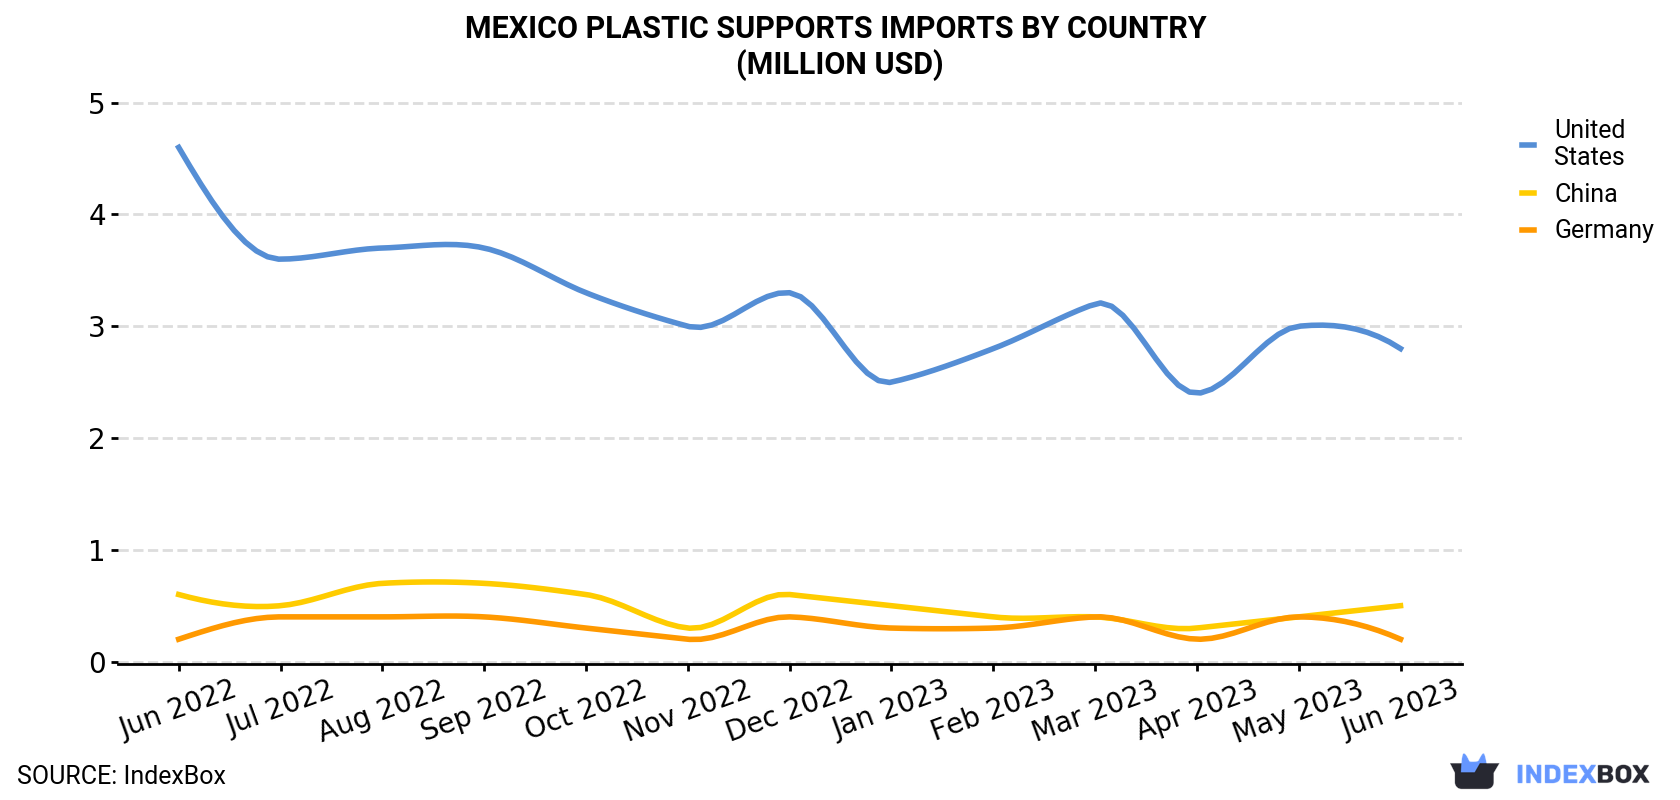 Mexico Plastic Supports Imports By Country (Million USD)